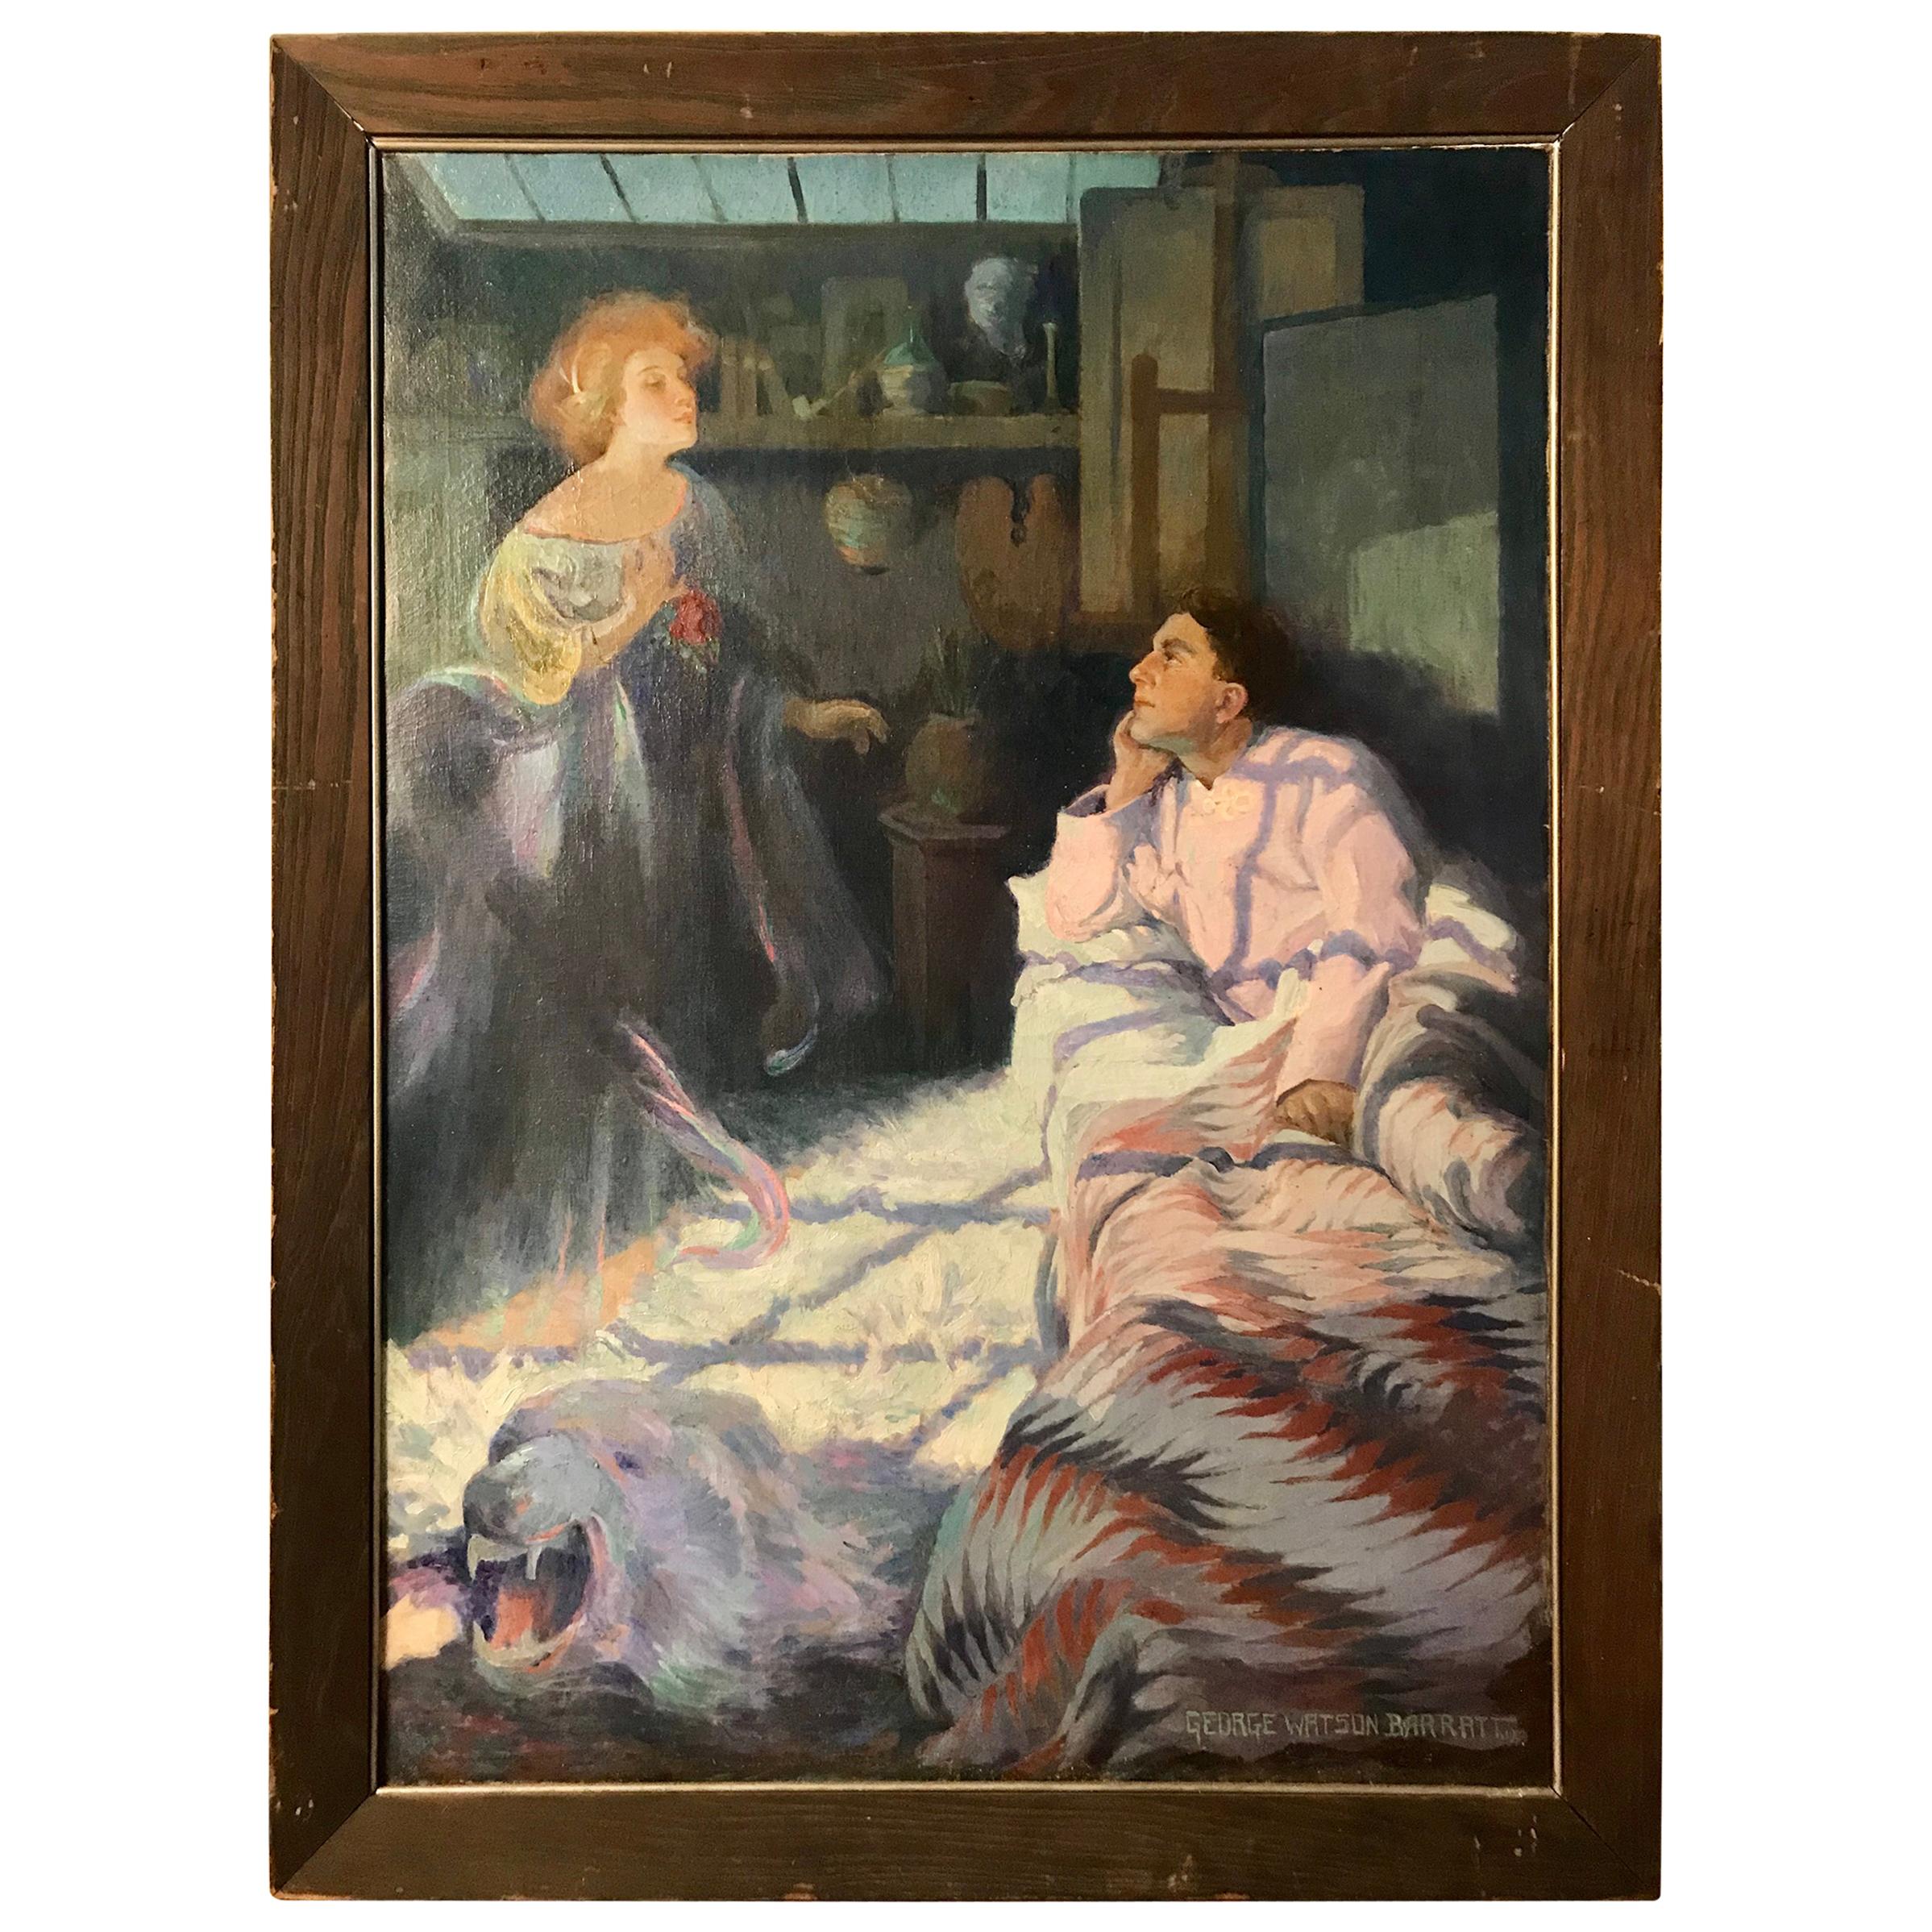 Painting by George Watson Barratt "The Dream" For Sale